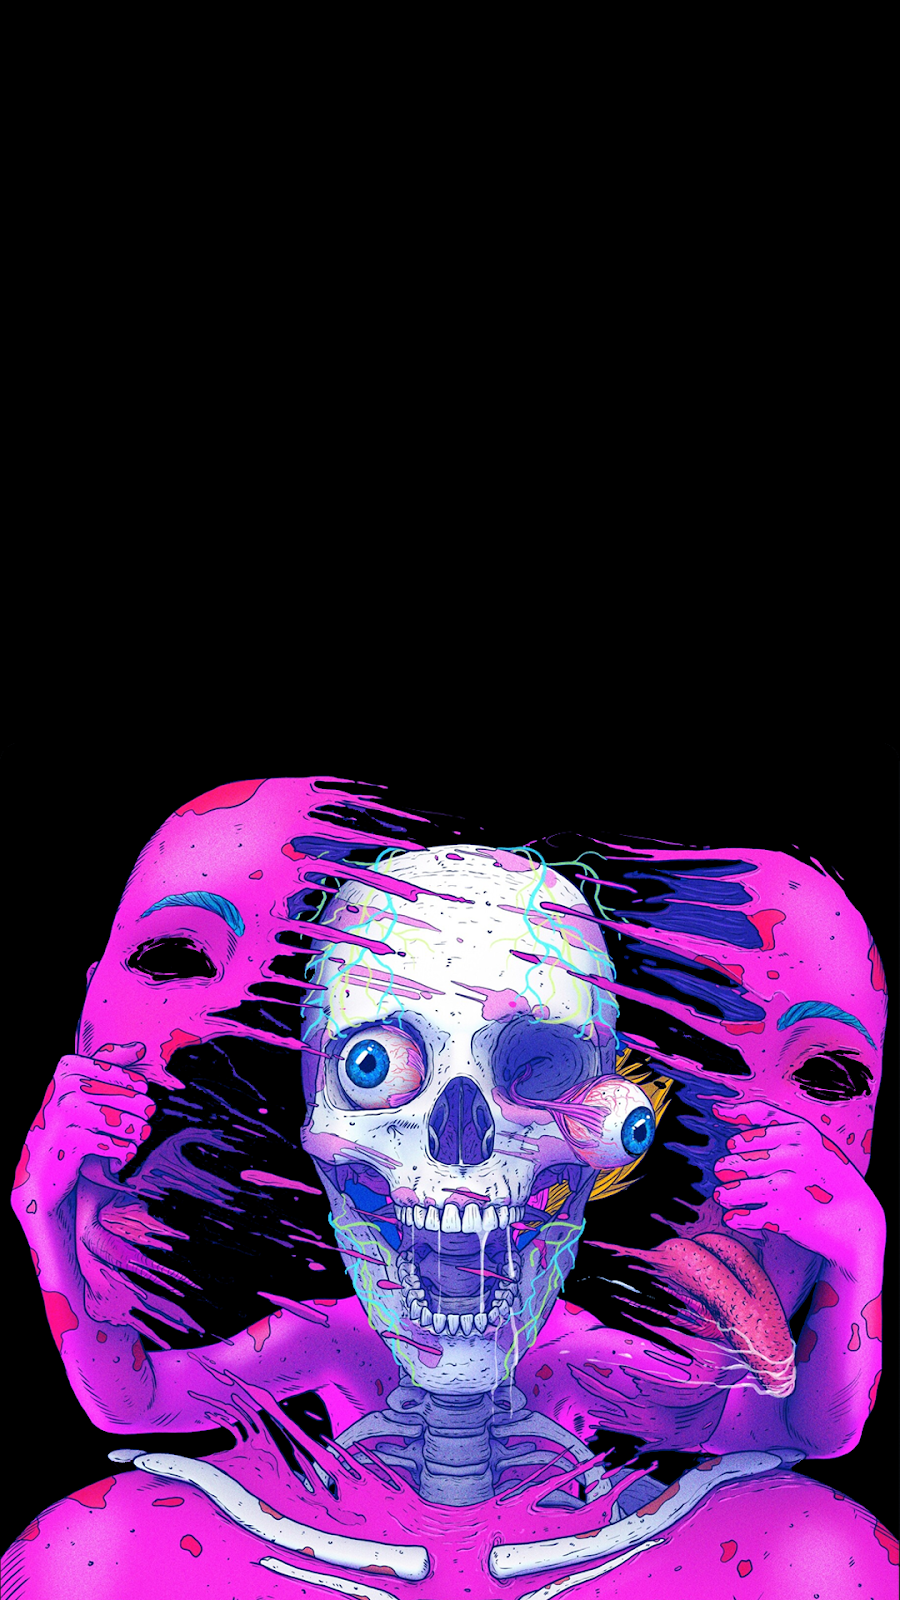 AMOLED PHONE WALLPAPER COLLECTION 122. Cool Wallpaper.cc. Skull wallpaper, Cool wallpaper, Phone wallpaper